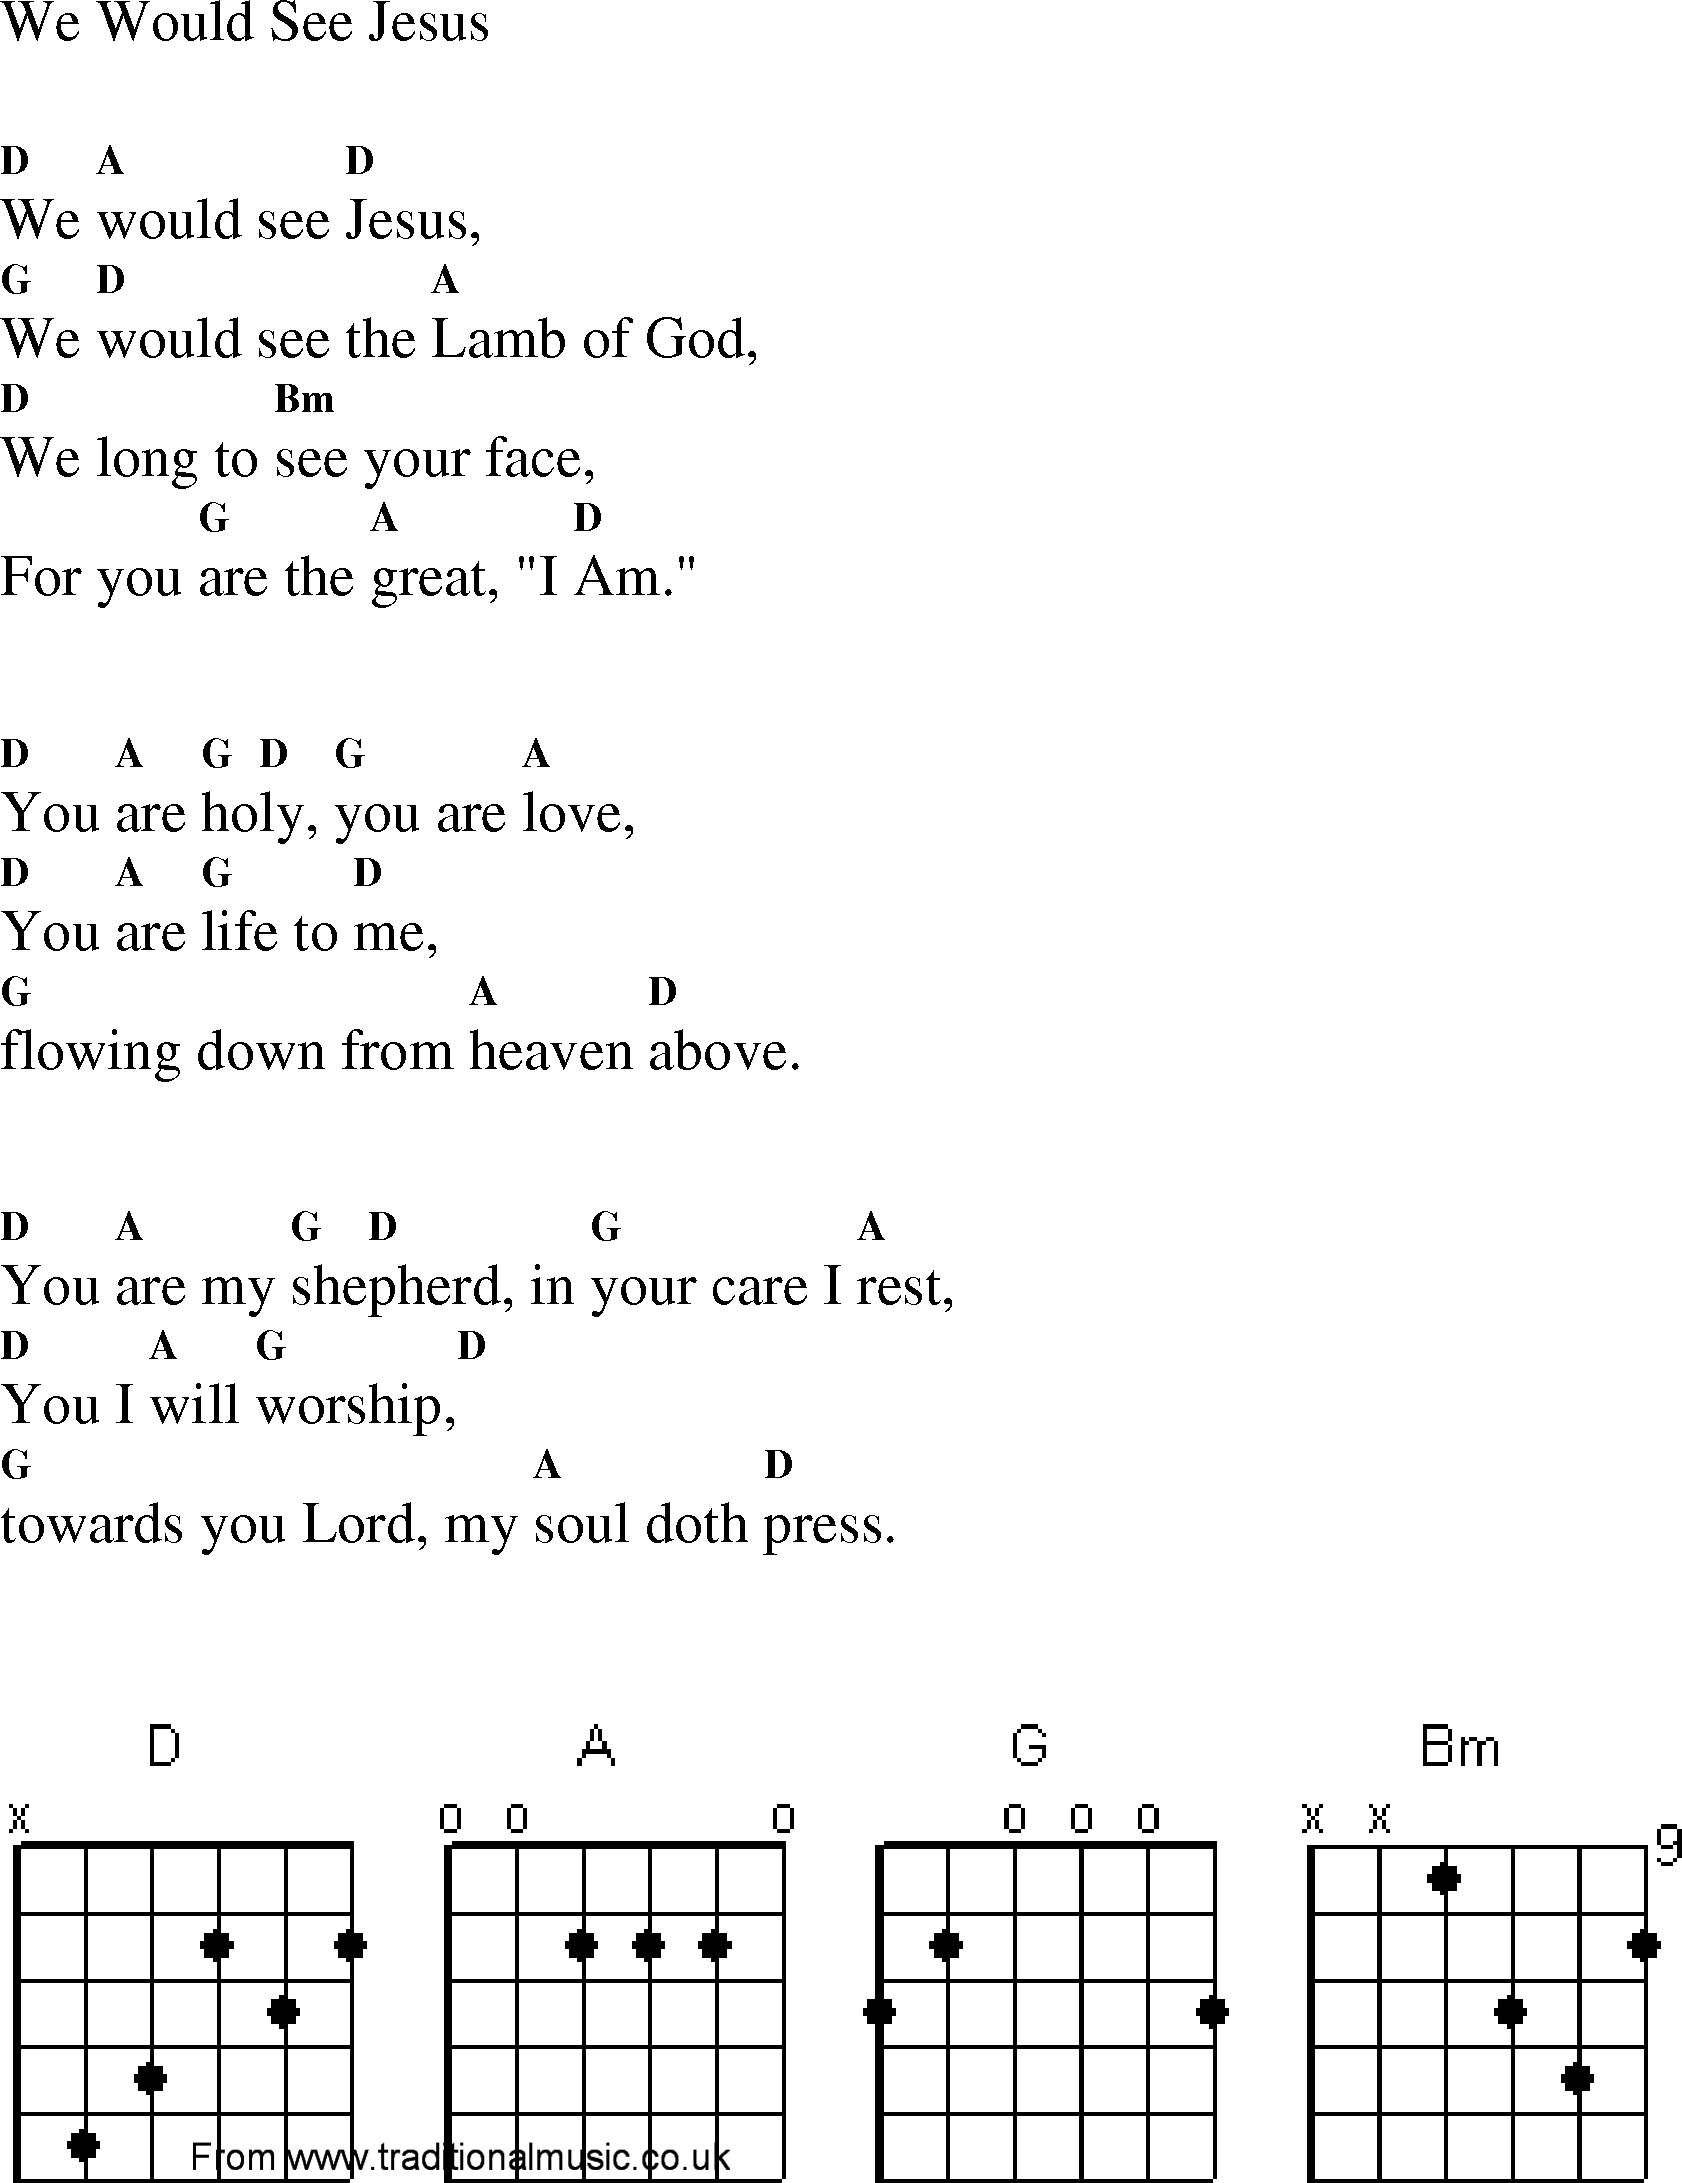 Gospel Song: we_would_see_jesus, lyrics and chords.